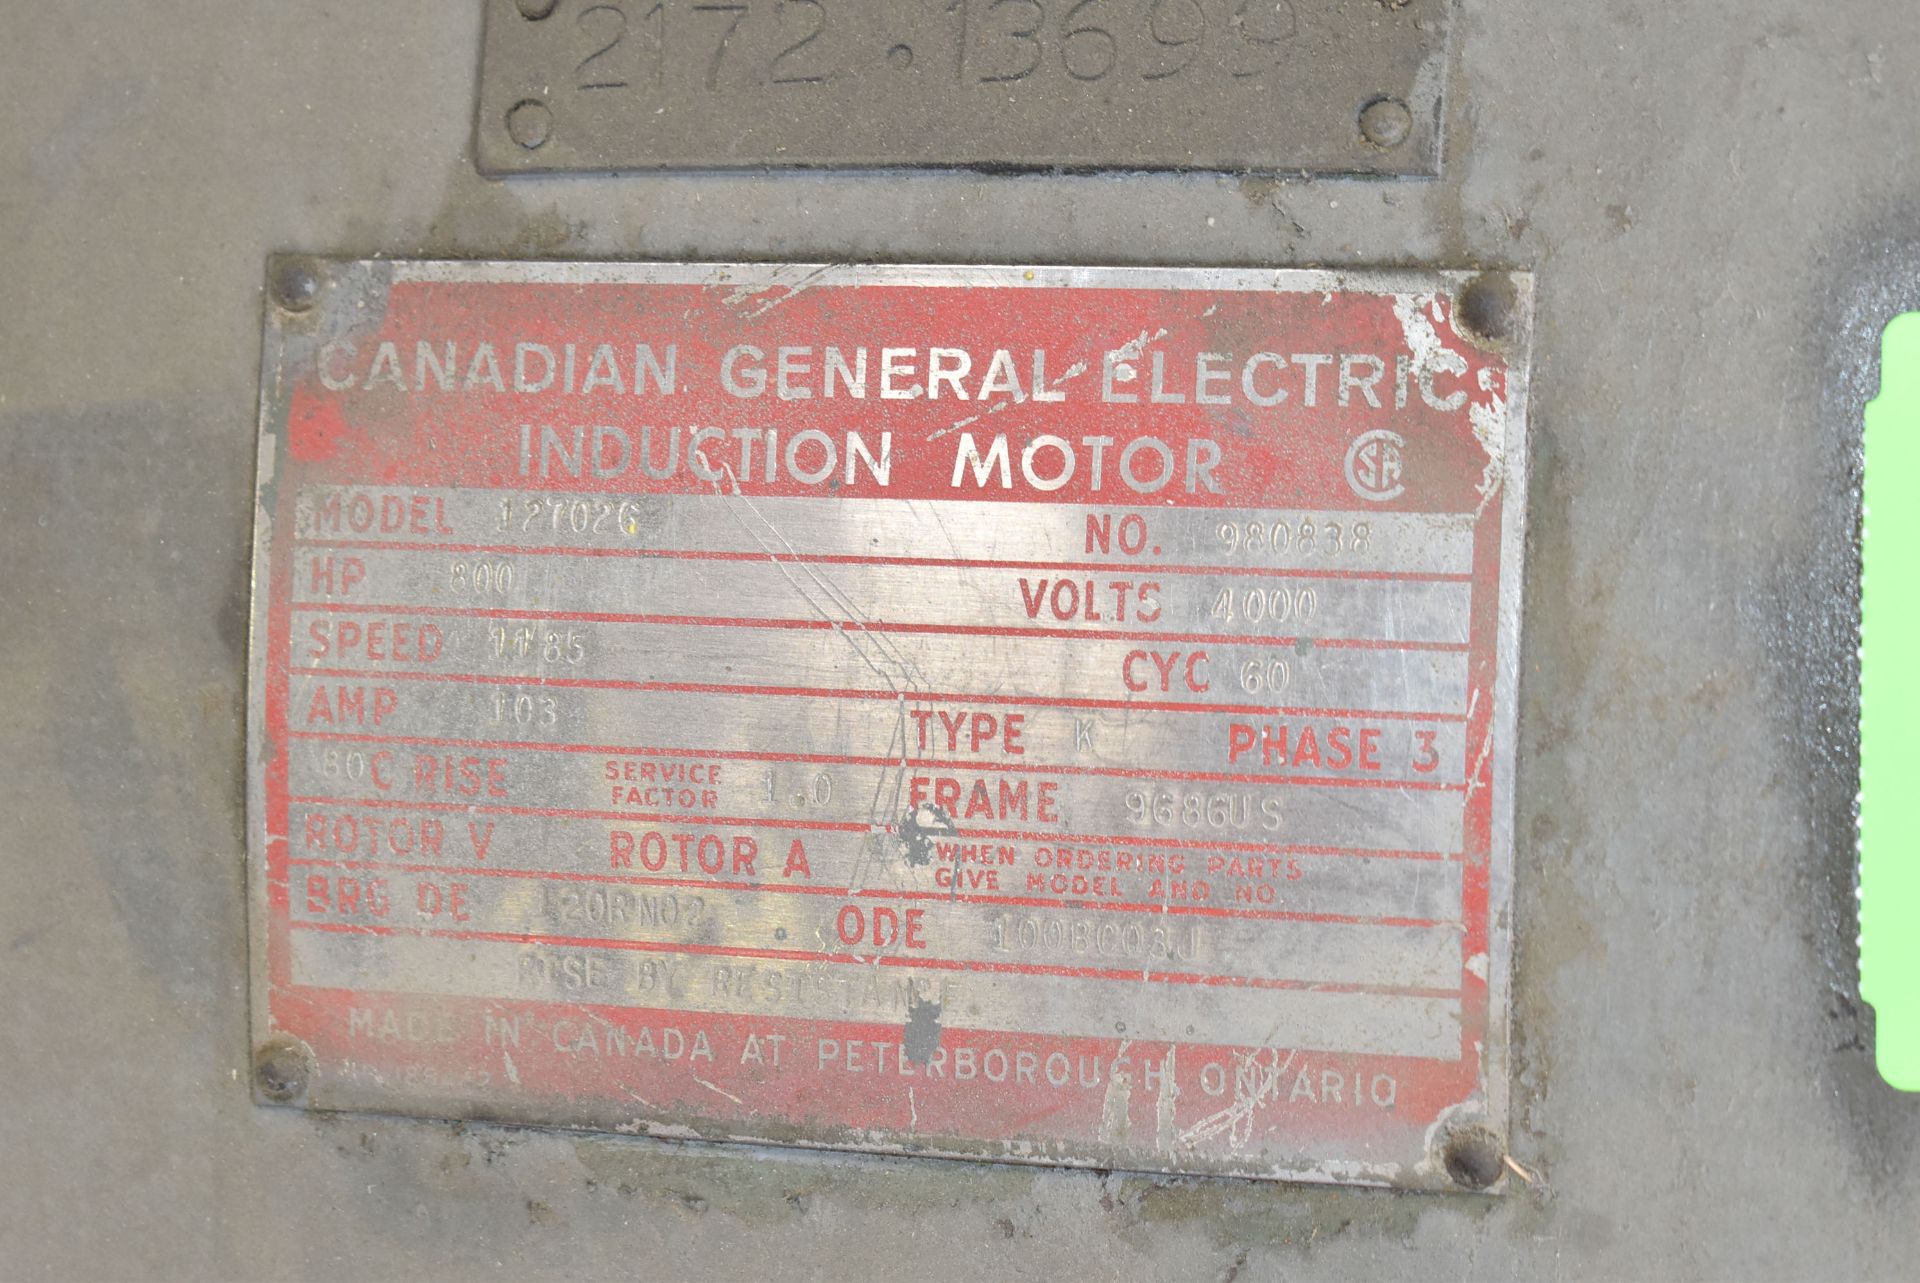 CANADIAN GENERAL ELECTRIC 127026 800 HP INDUCTION MOTOR, 4000V/3PH/60HZ, S/N 980838 (CMD-014-22S) - Image 3 of 6